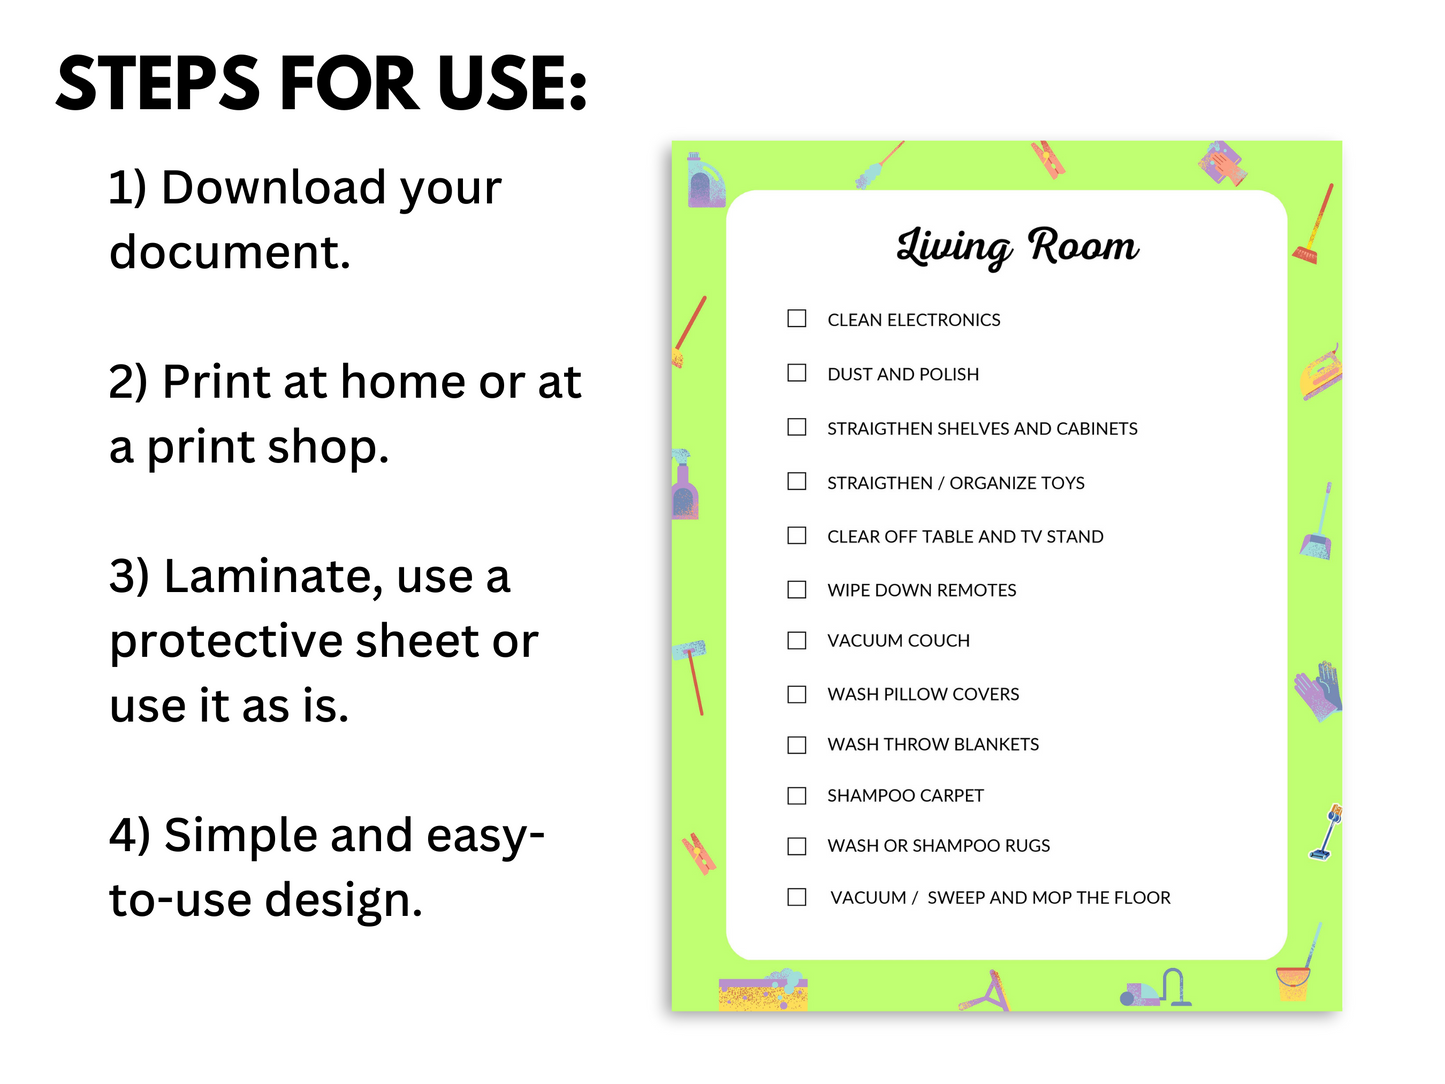 Printable living room checklist shown with steps for use.